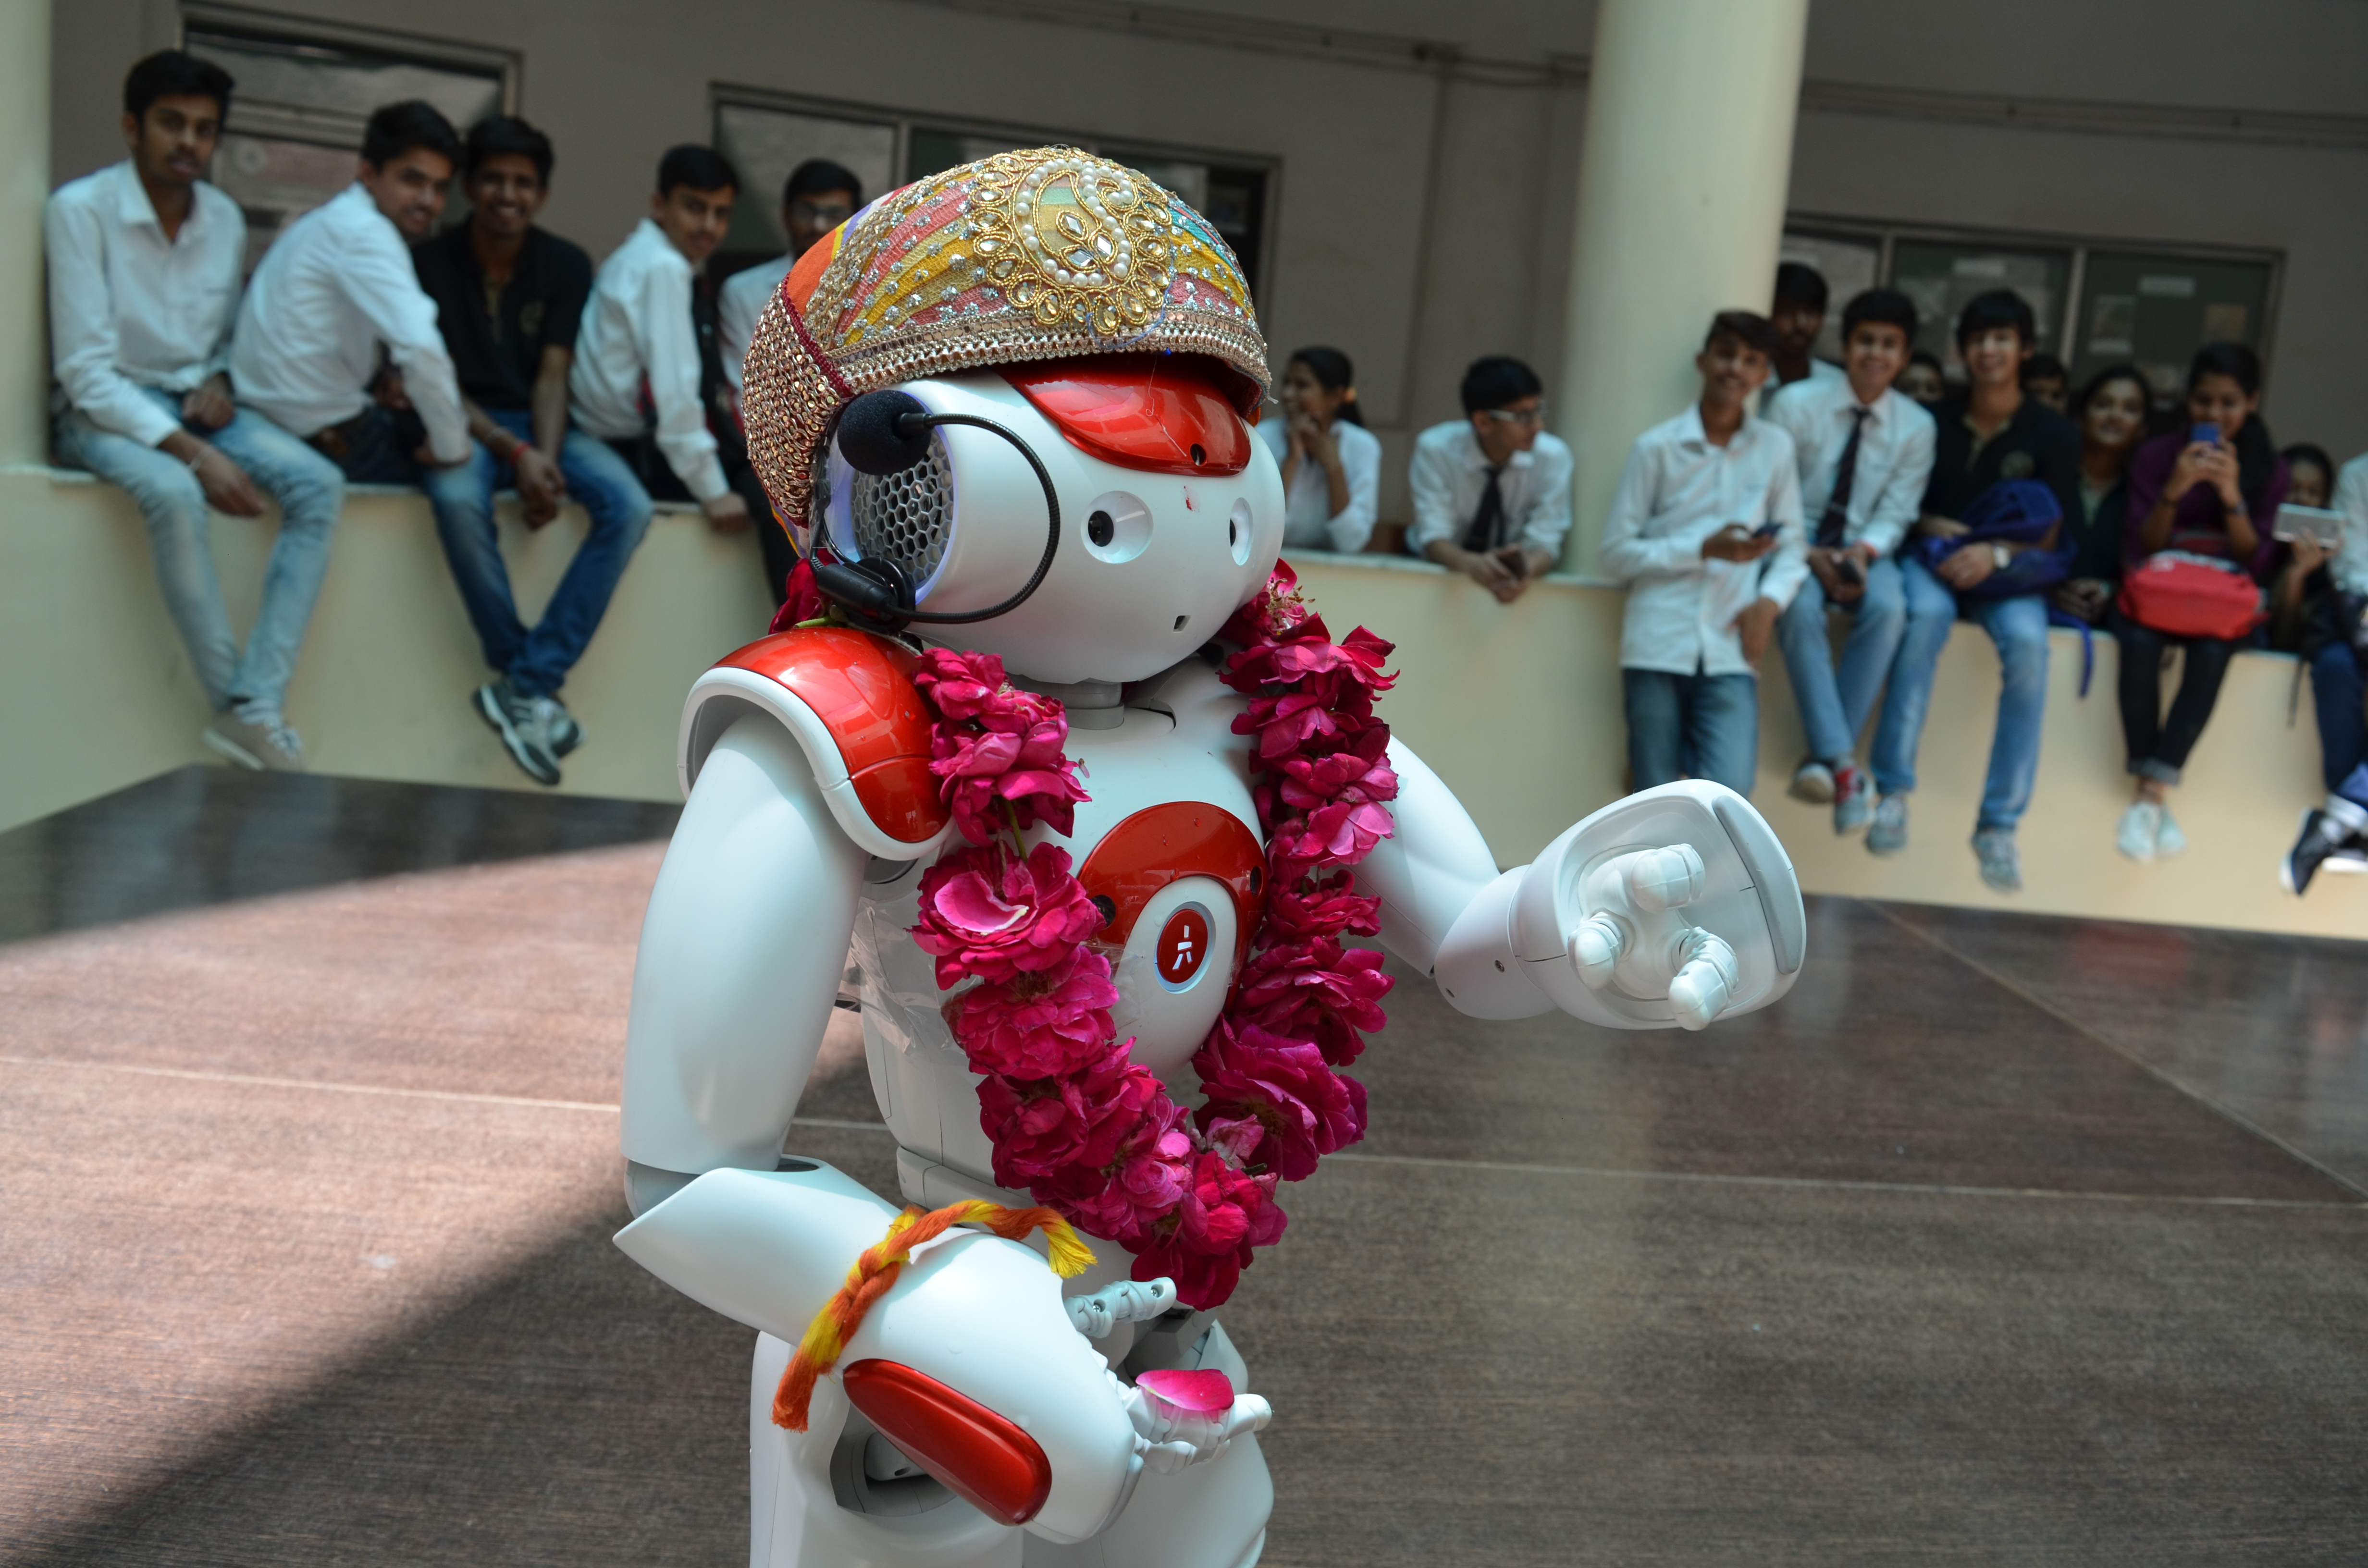 Travels from Paris to Udaipur to Learn Mewari: The ‘Nao’ Robot